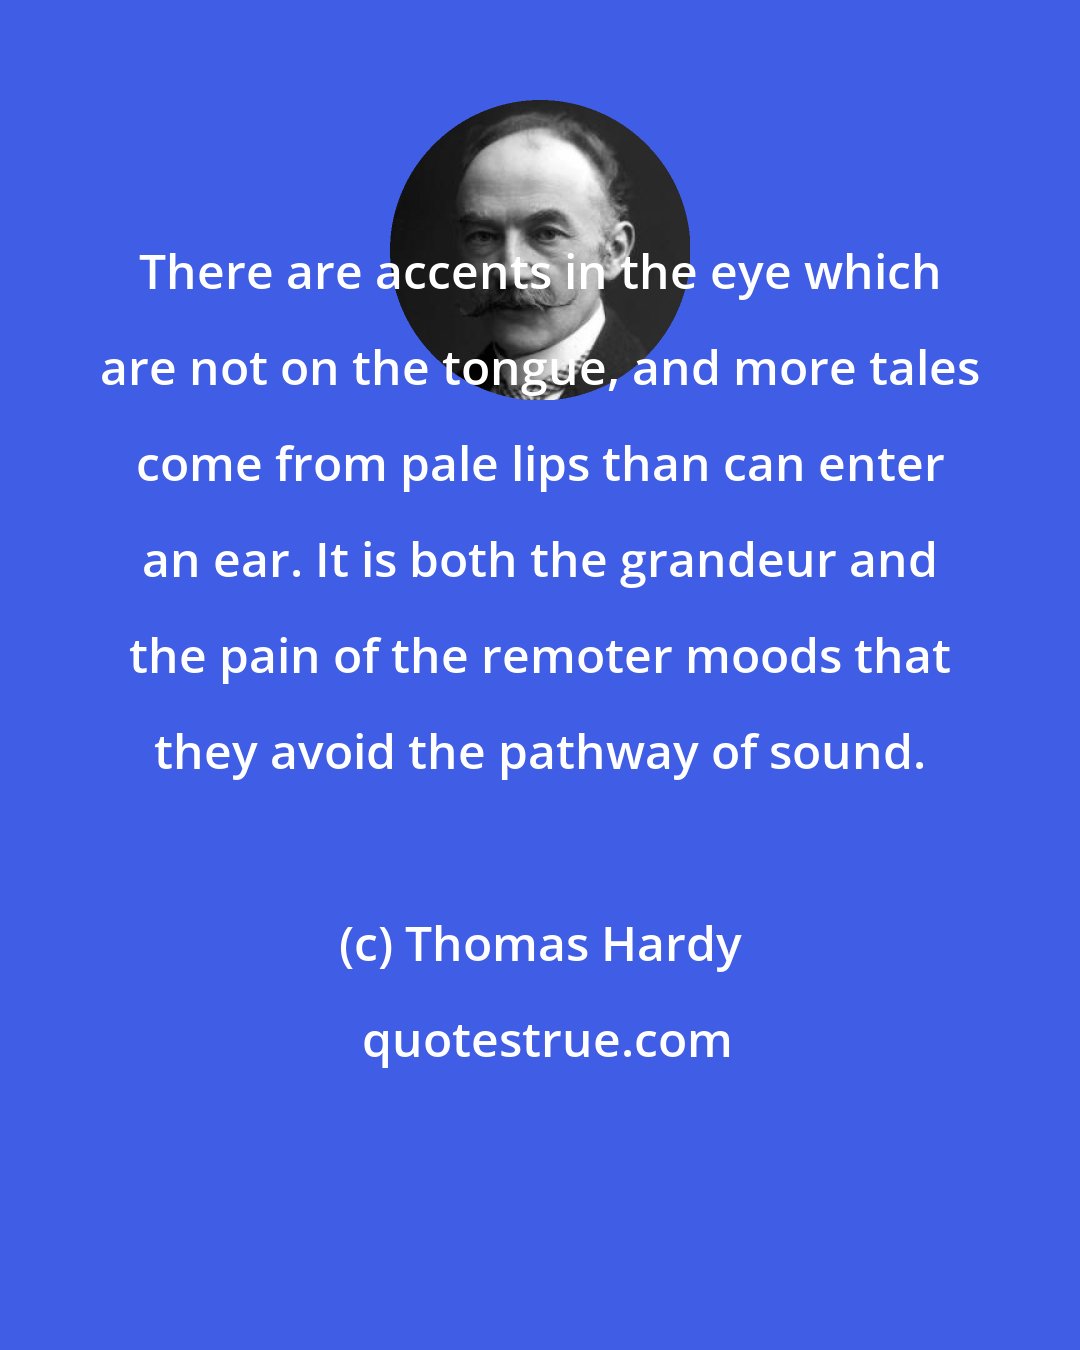 Thomas Hardy: There are accents in the eye which are not on the tongue, and more tales come from pale lips than can enter an ear. It is both the grandeur and the pain of the remoter moods that they avoid the pathway of sound.